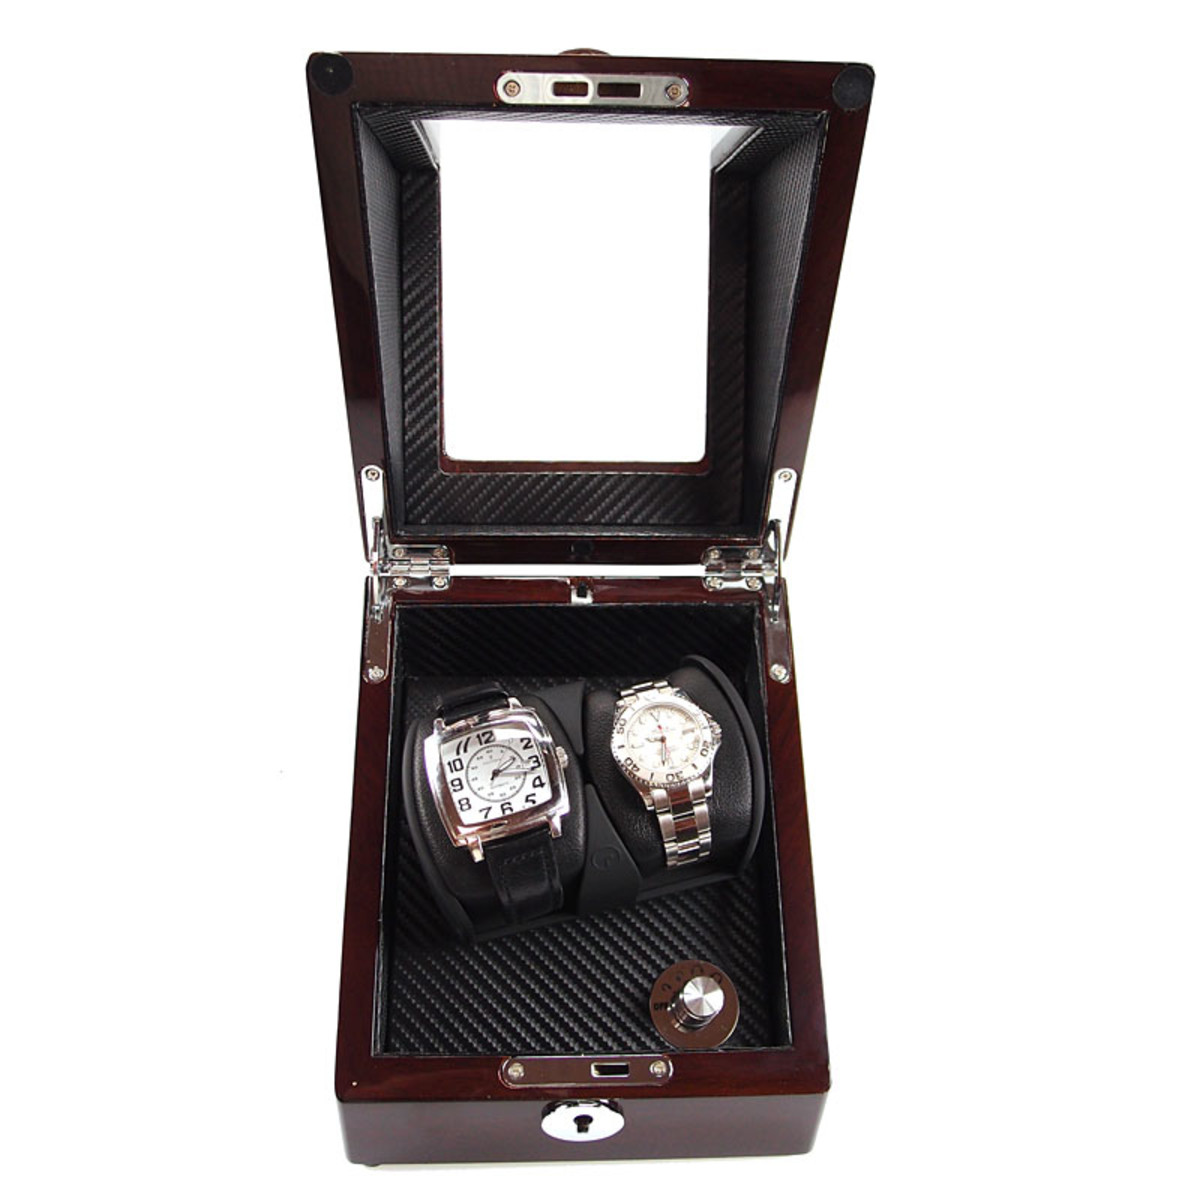 Care for your watch with a watch winder